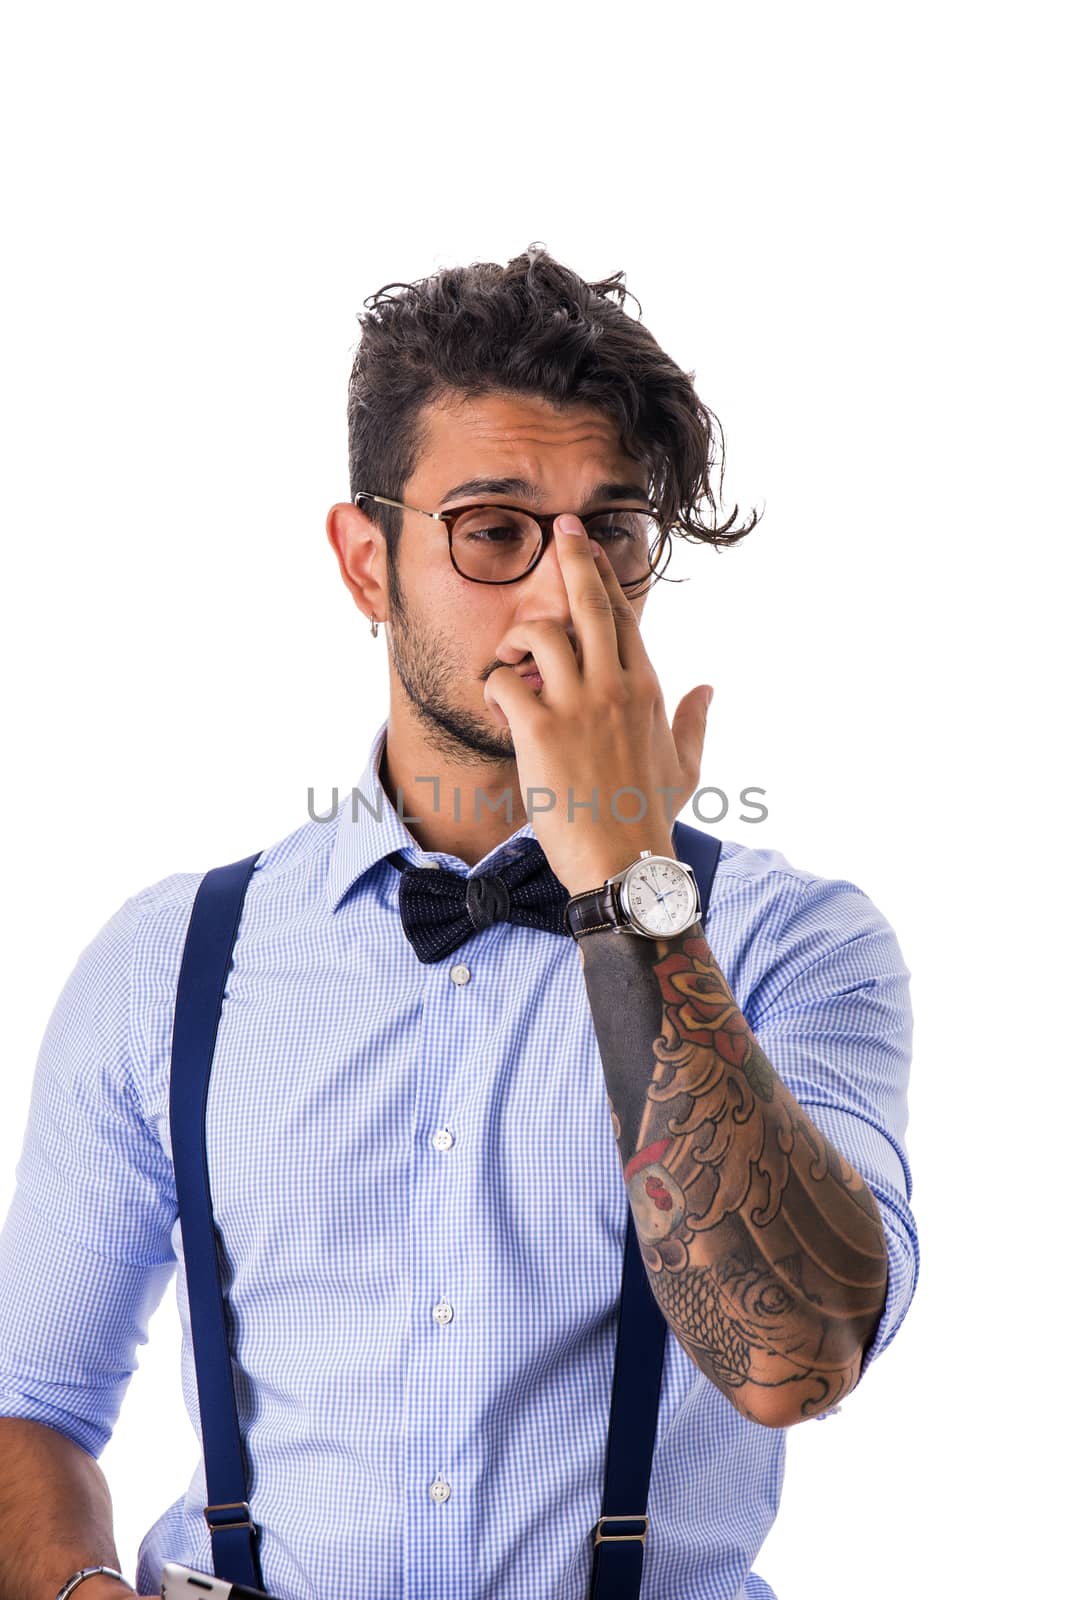 Portrait of shy or embarassed young man in glasses,bow-tie,suspenders and shirt looking away. Studio shot